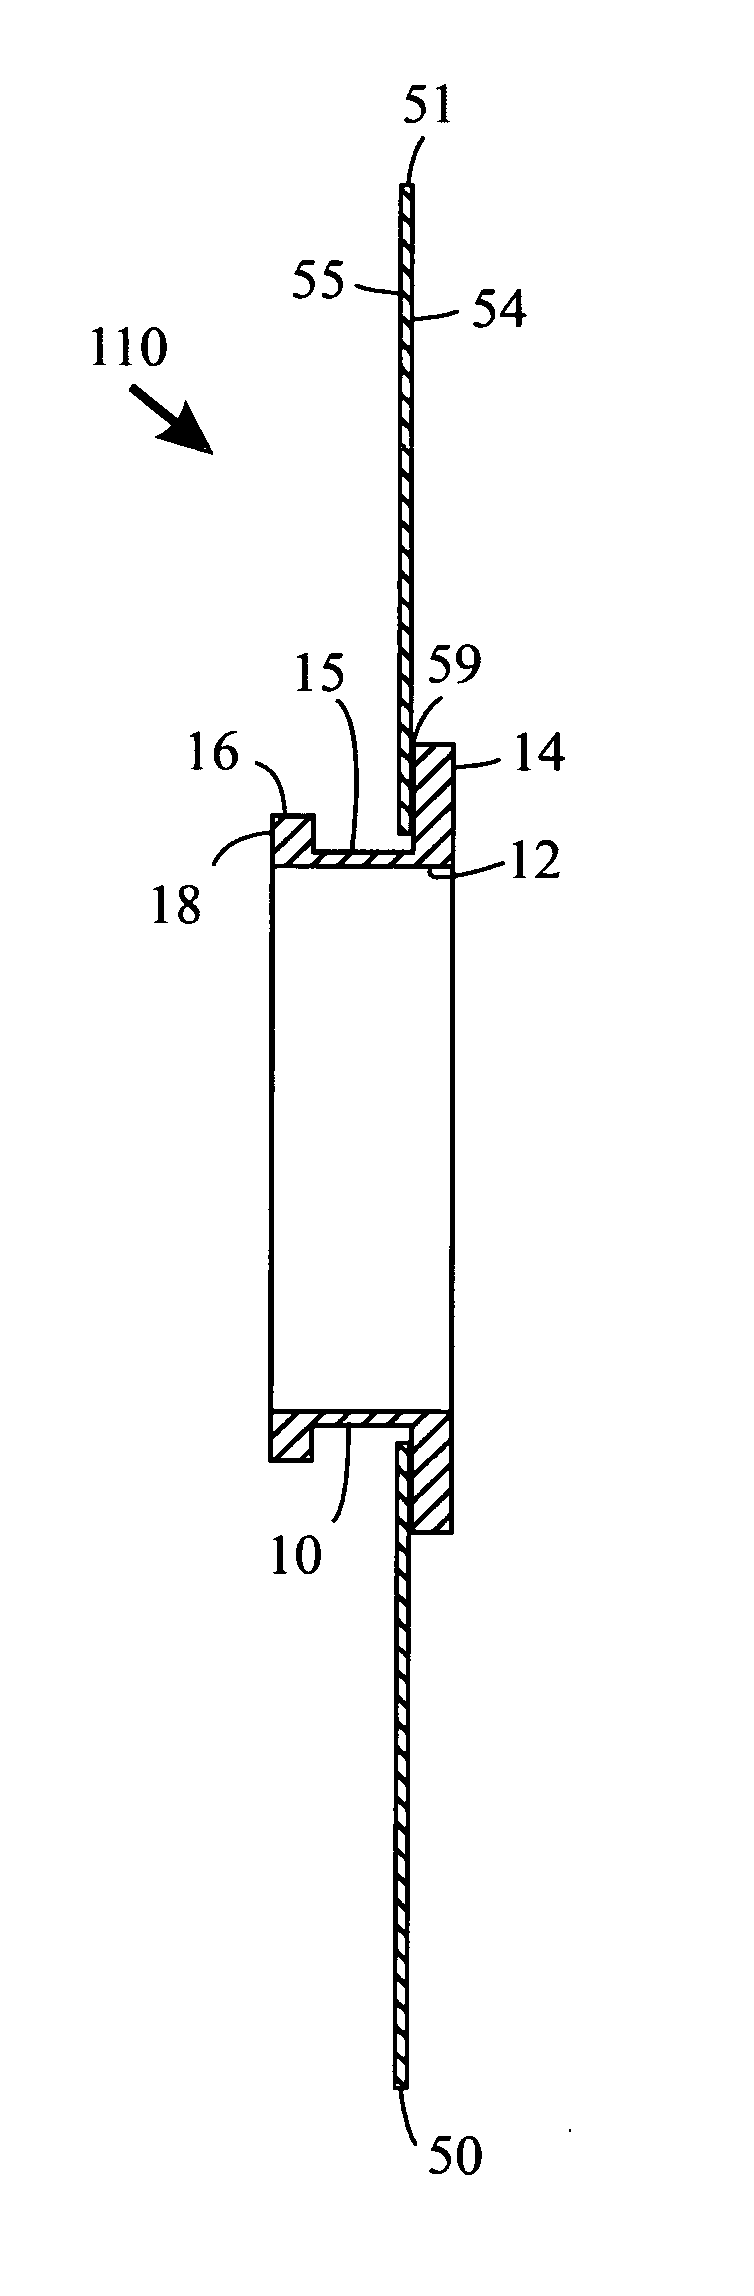 Interconnect and method for joining receptacles